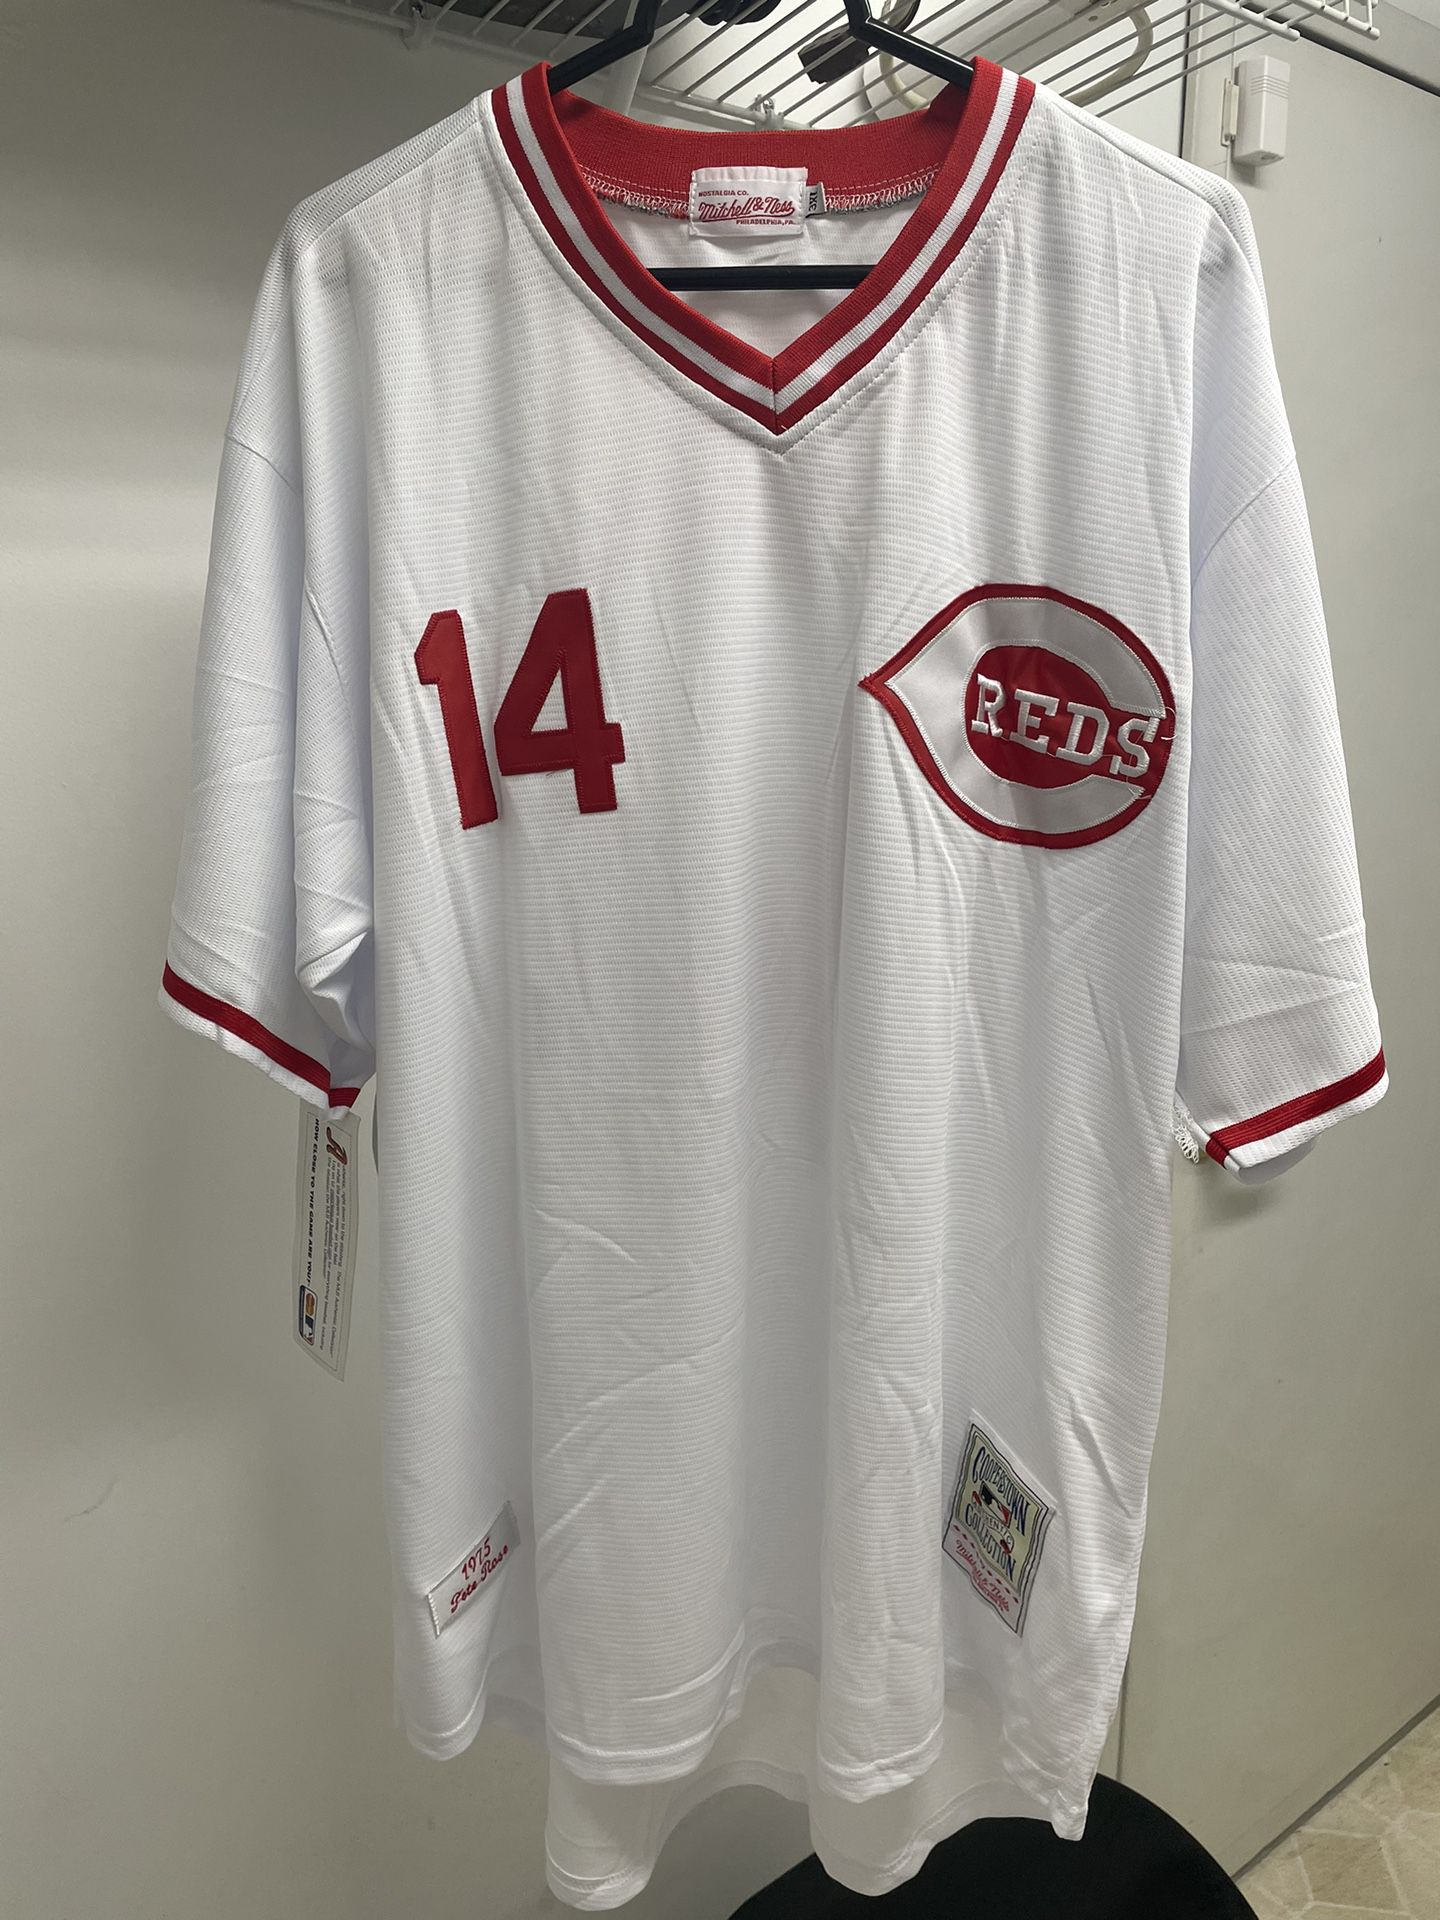 Cincinnati Reds Pete Rose stitched jersey size Small up to 3xl